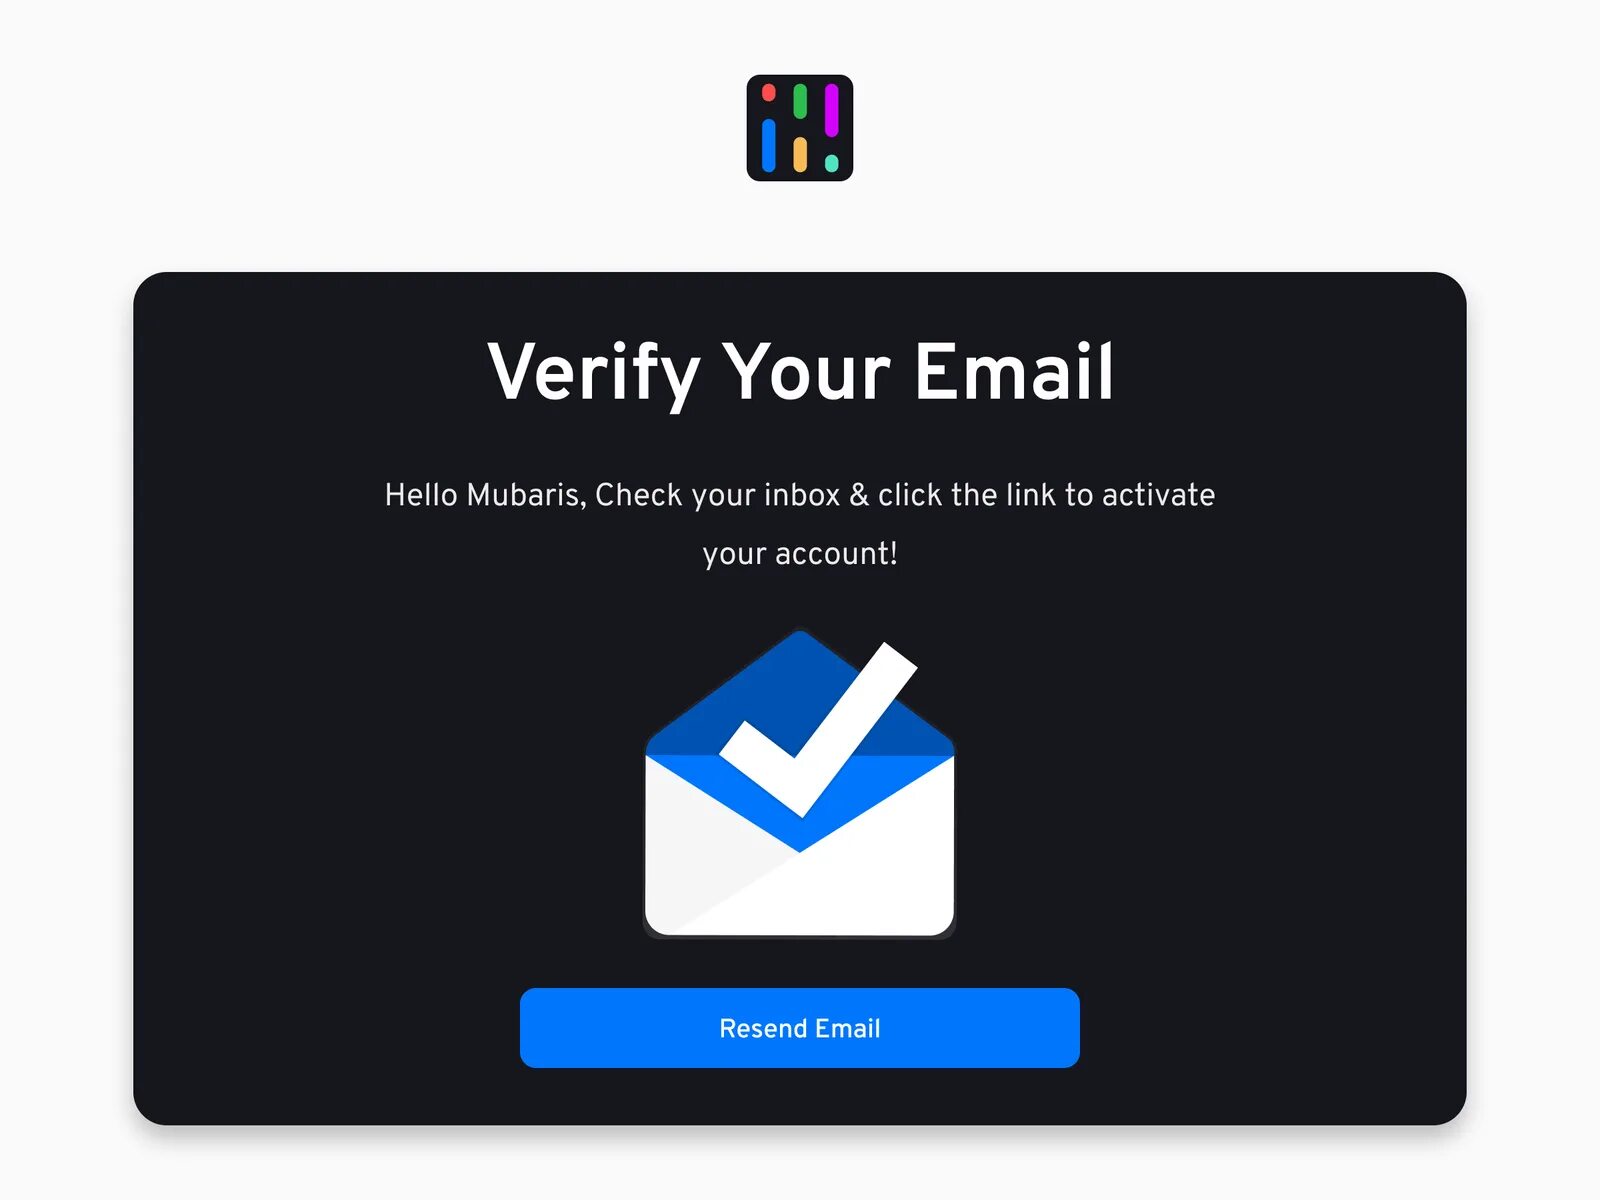 Verify email. Verify your email. Верификация email. Верифицирован email. Addresses being verified